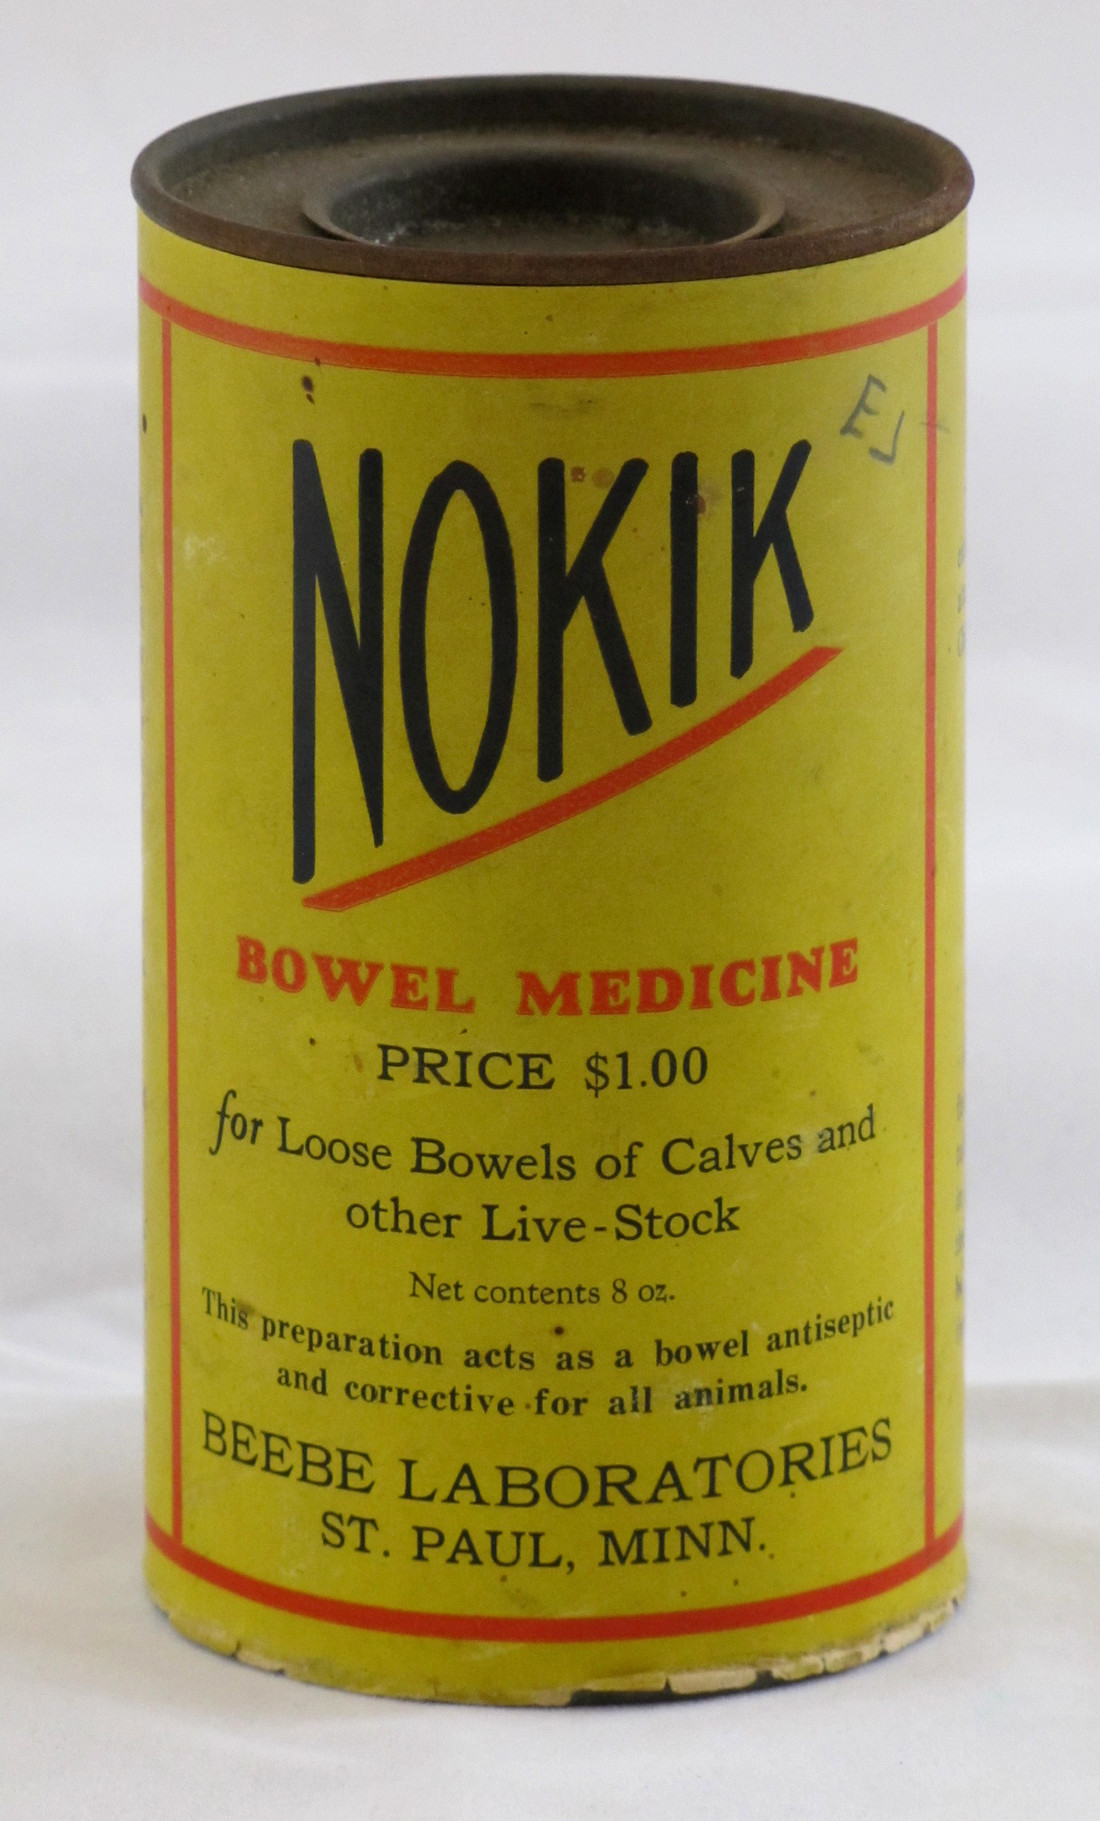 Can of Nokik, used to cure loose bowels in calves and other livestock